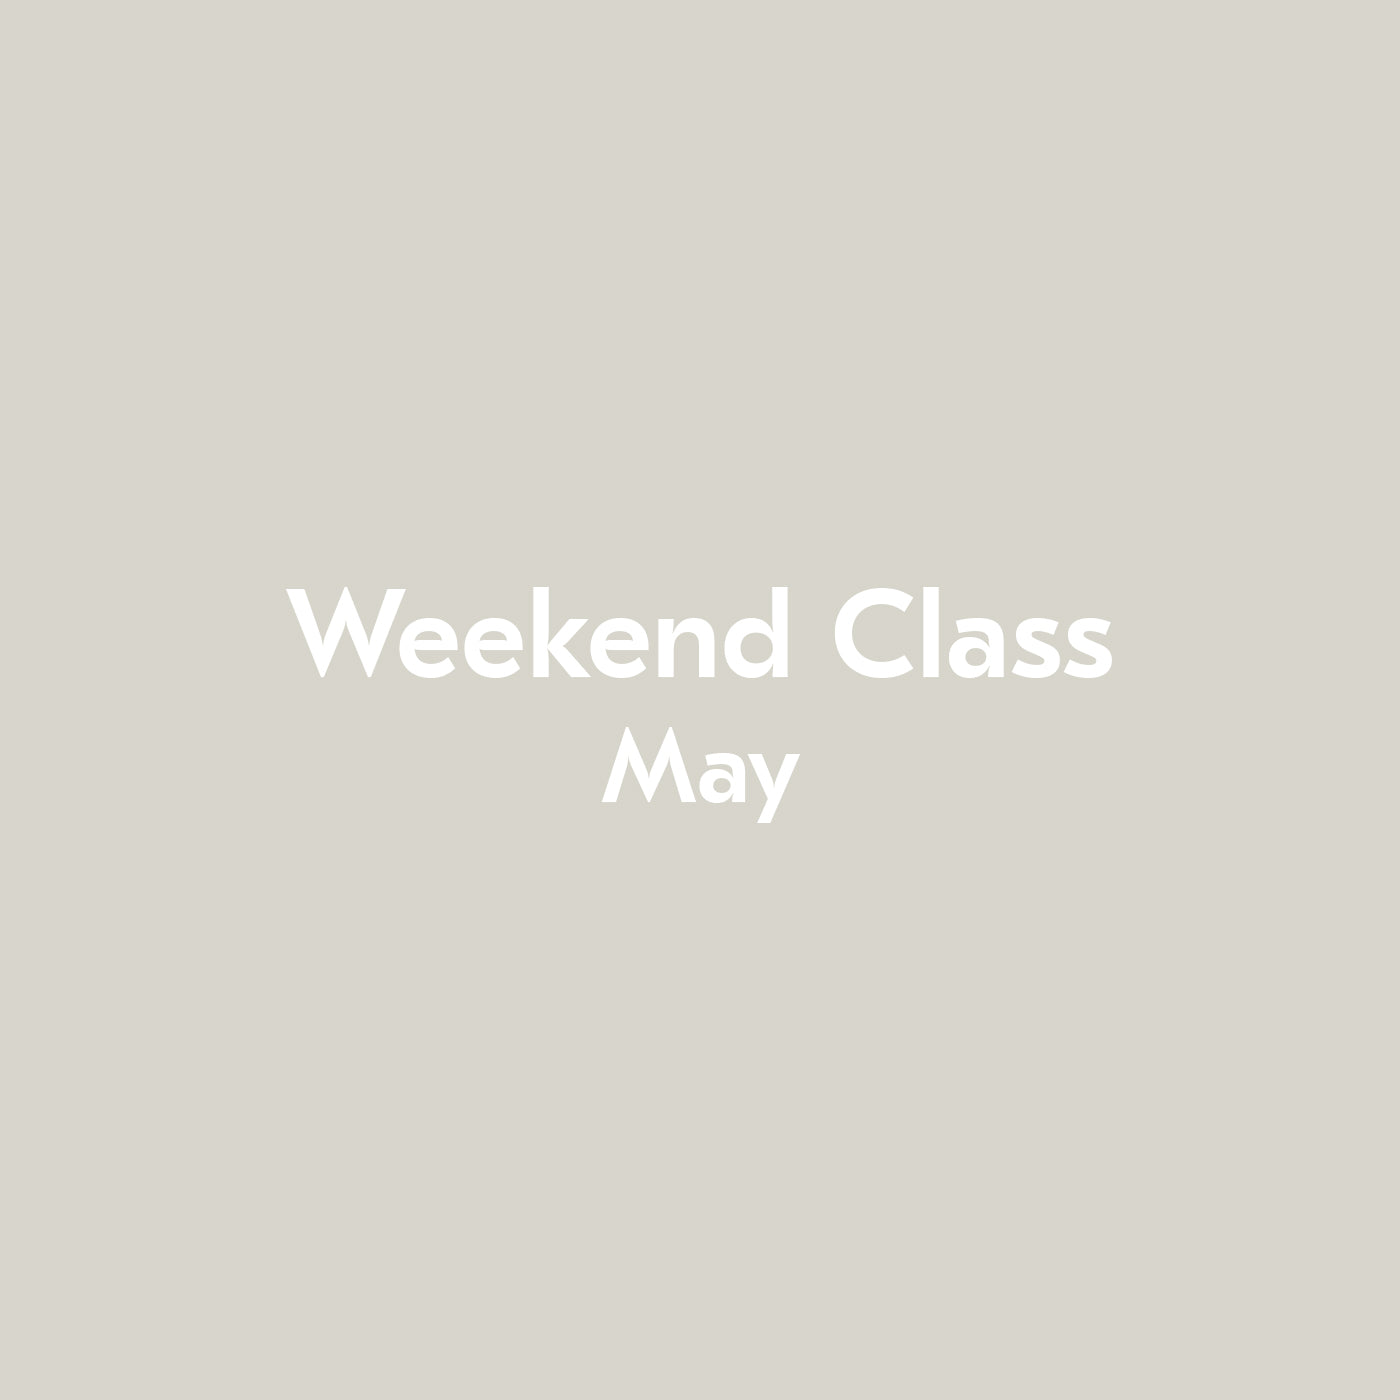 Weekend Class May